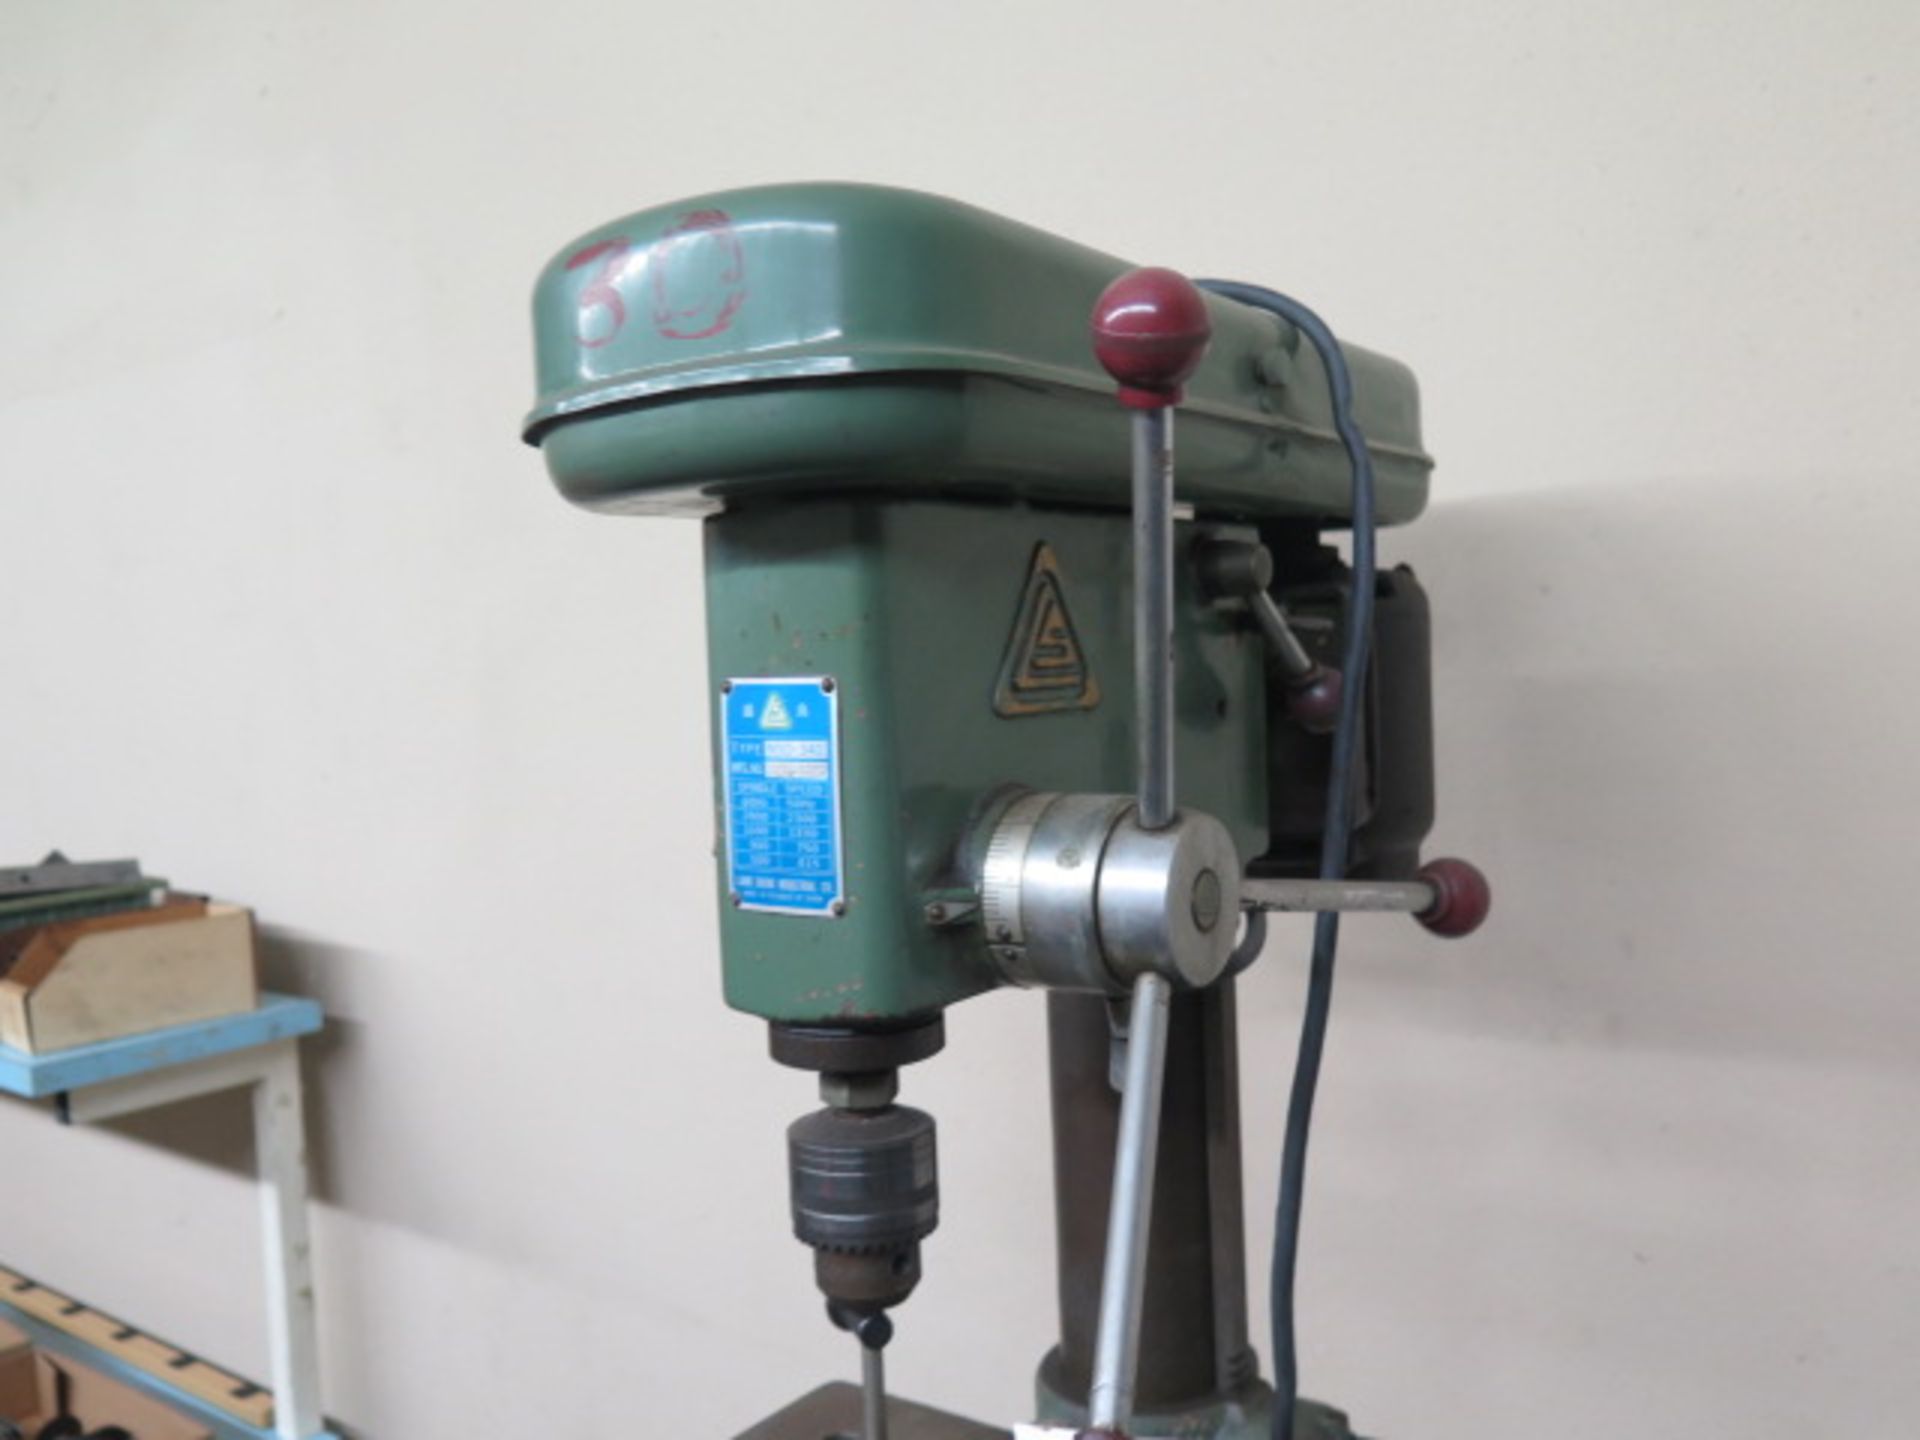 Liang Sheng Bench Model Drill Press (SOLD AS-IS - NO WARRANTY) - Image 2 of 5